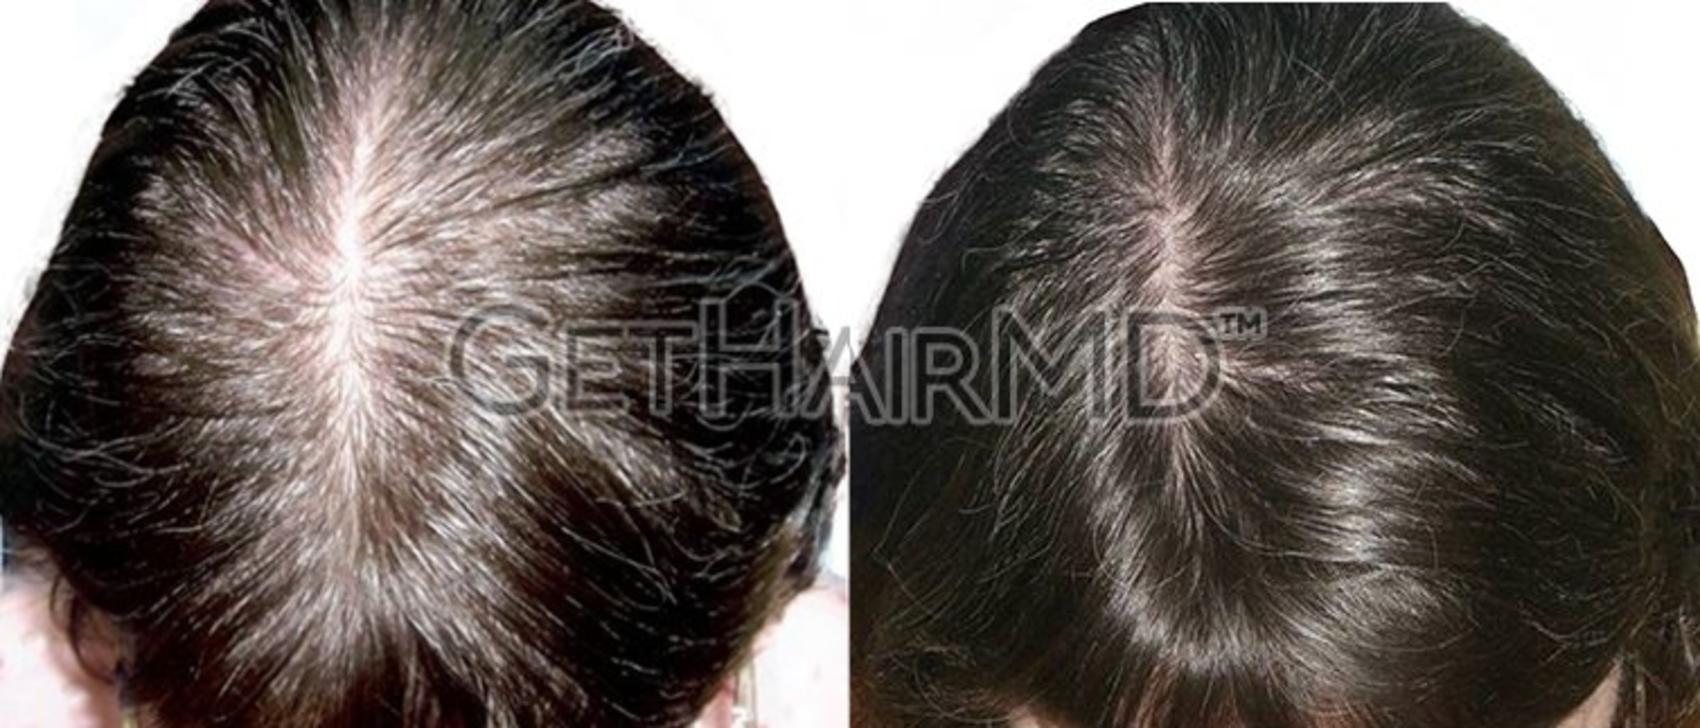 GetHairMD Hair Restoration Case 306 Before & After t | Webster, TX | Houston Plastic and Reconstructive Surgery